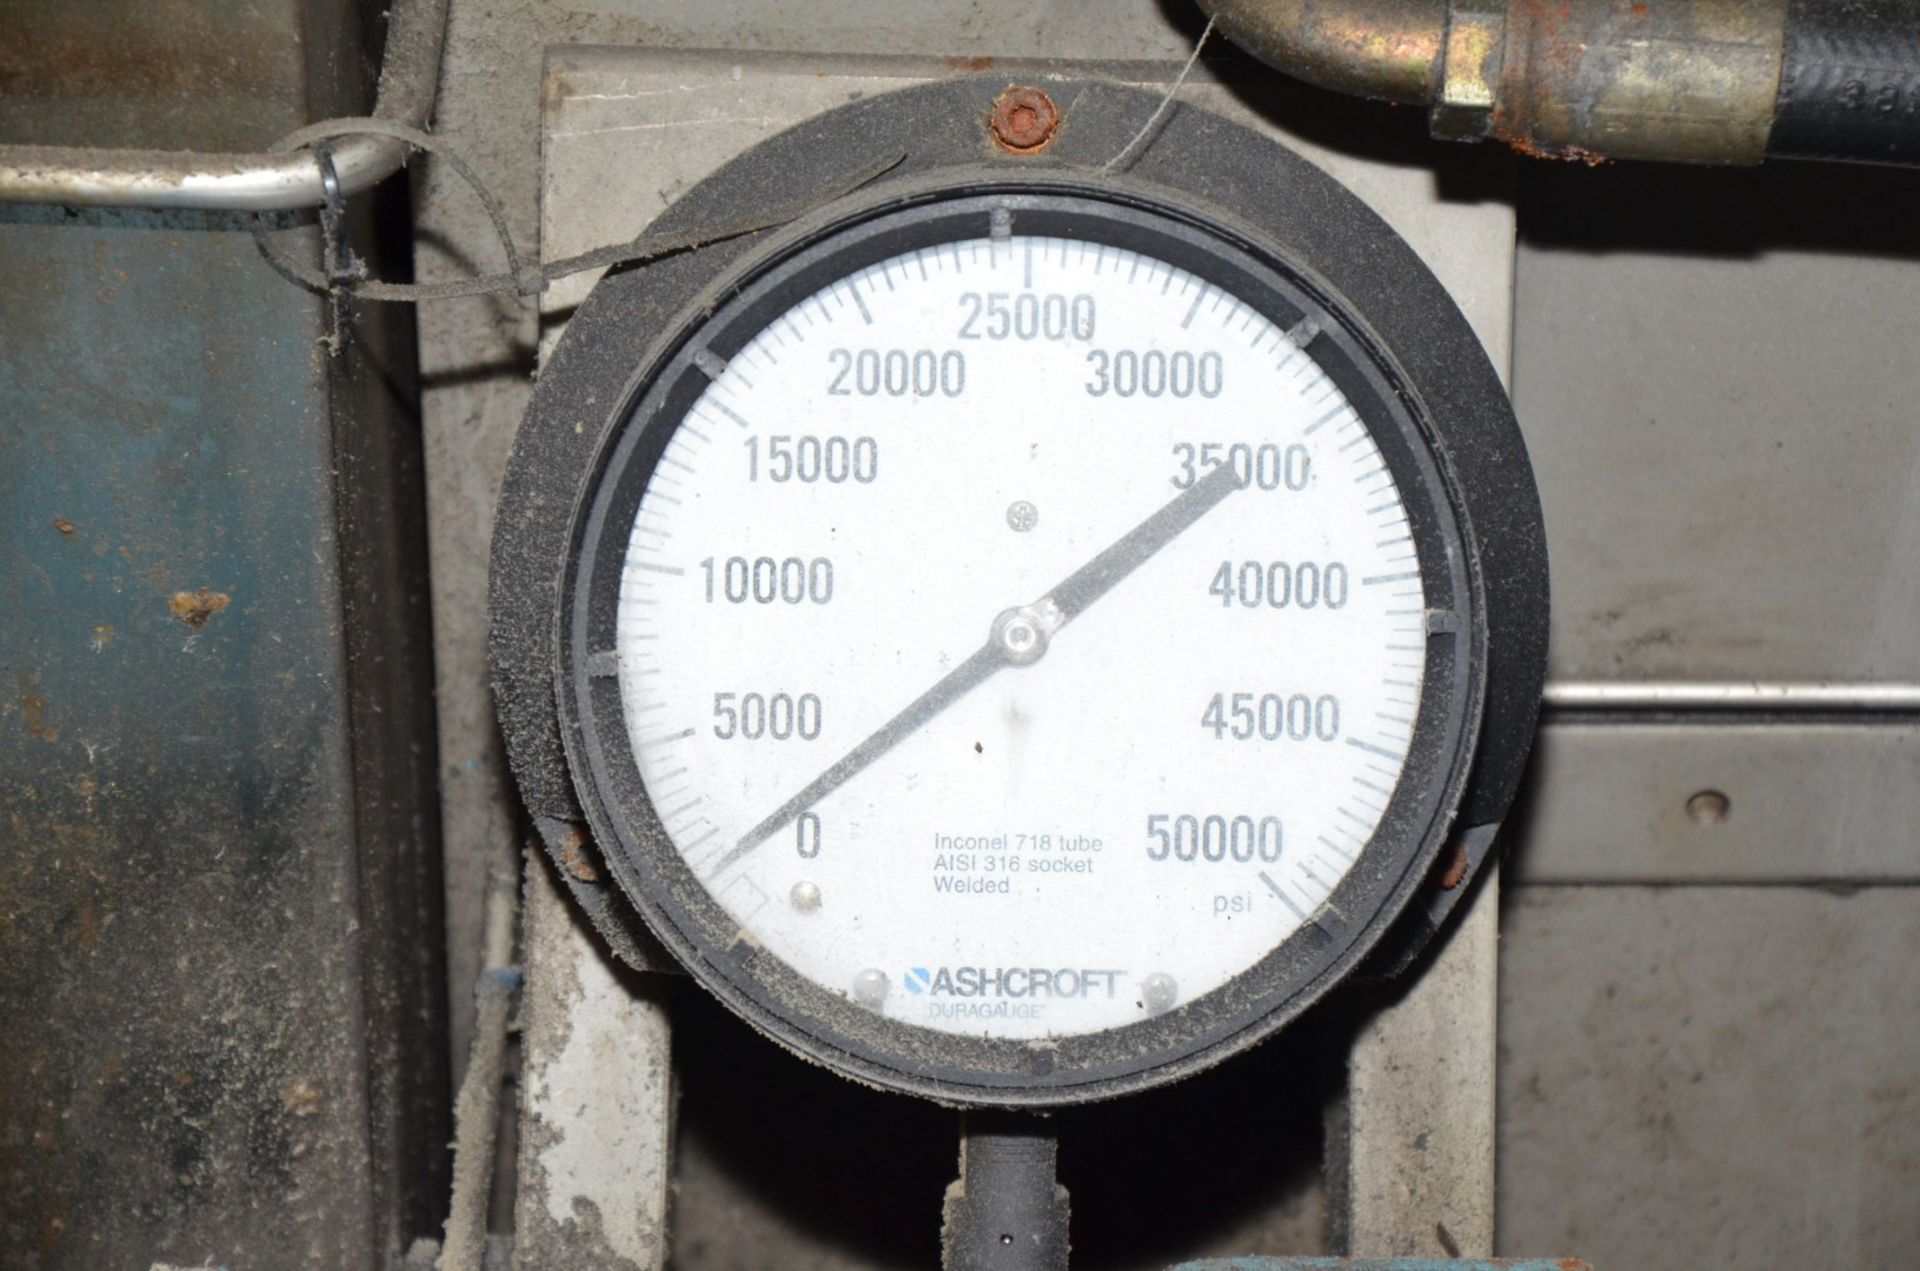 JET-X MODEL 2000 INTENSIFIER PUMP WITH 20,000 PSI MAX OPERATING PRESSURE, S/N N/A (CI) [RIGGING - Image 5 of 5